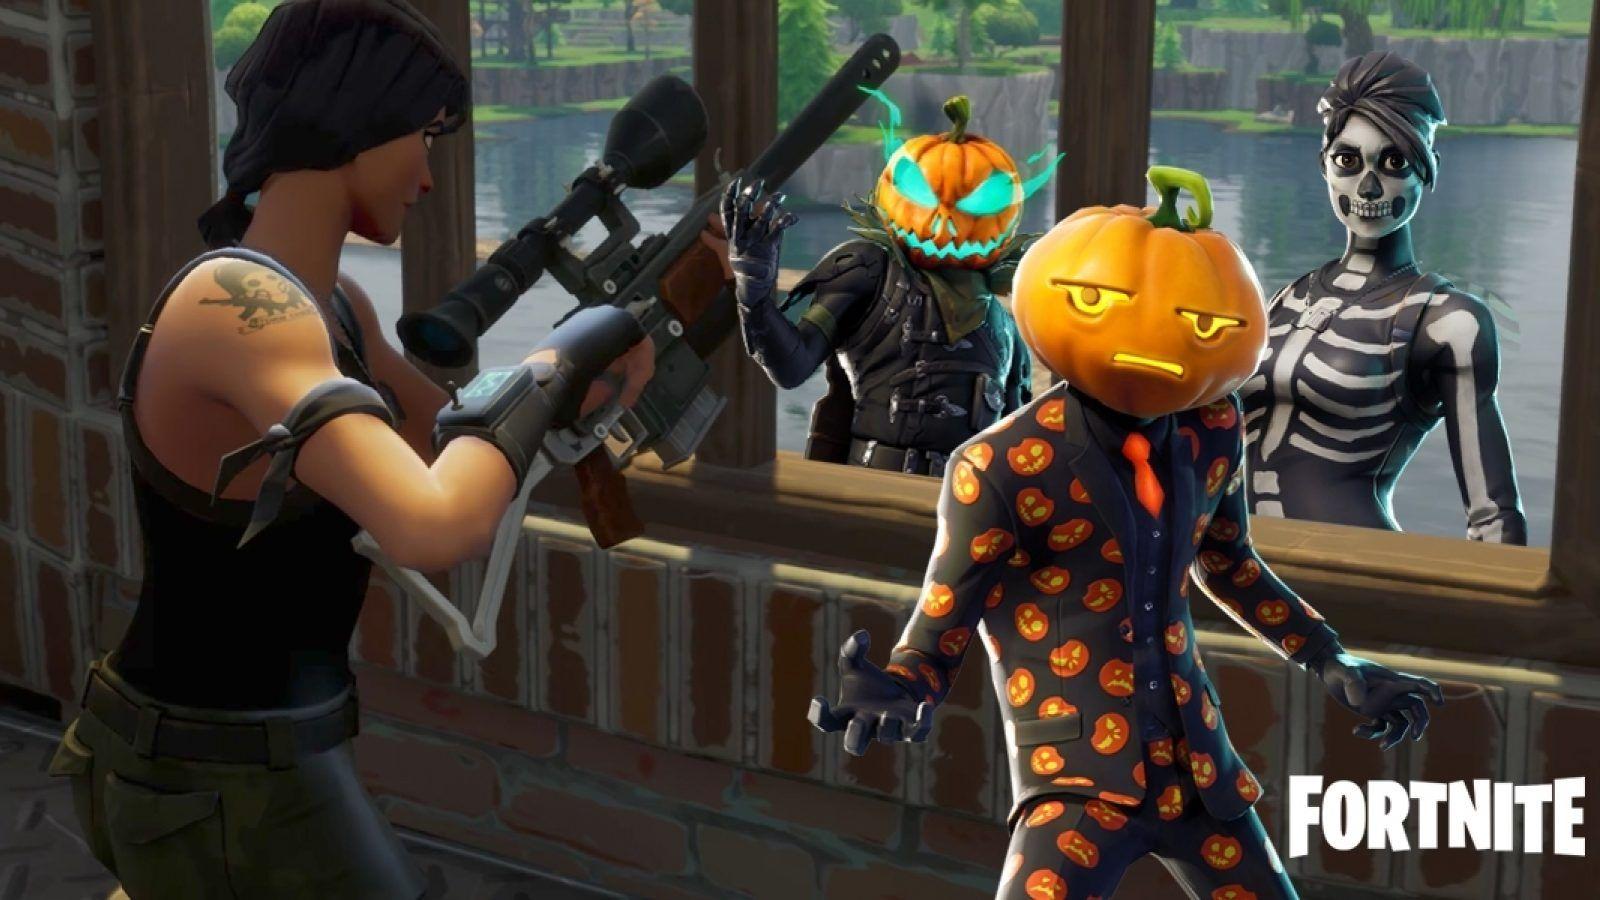 Names and rarities of leaked skins and cosmetics found in Fortnite's